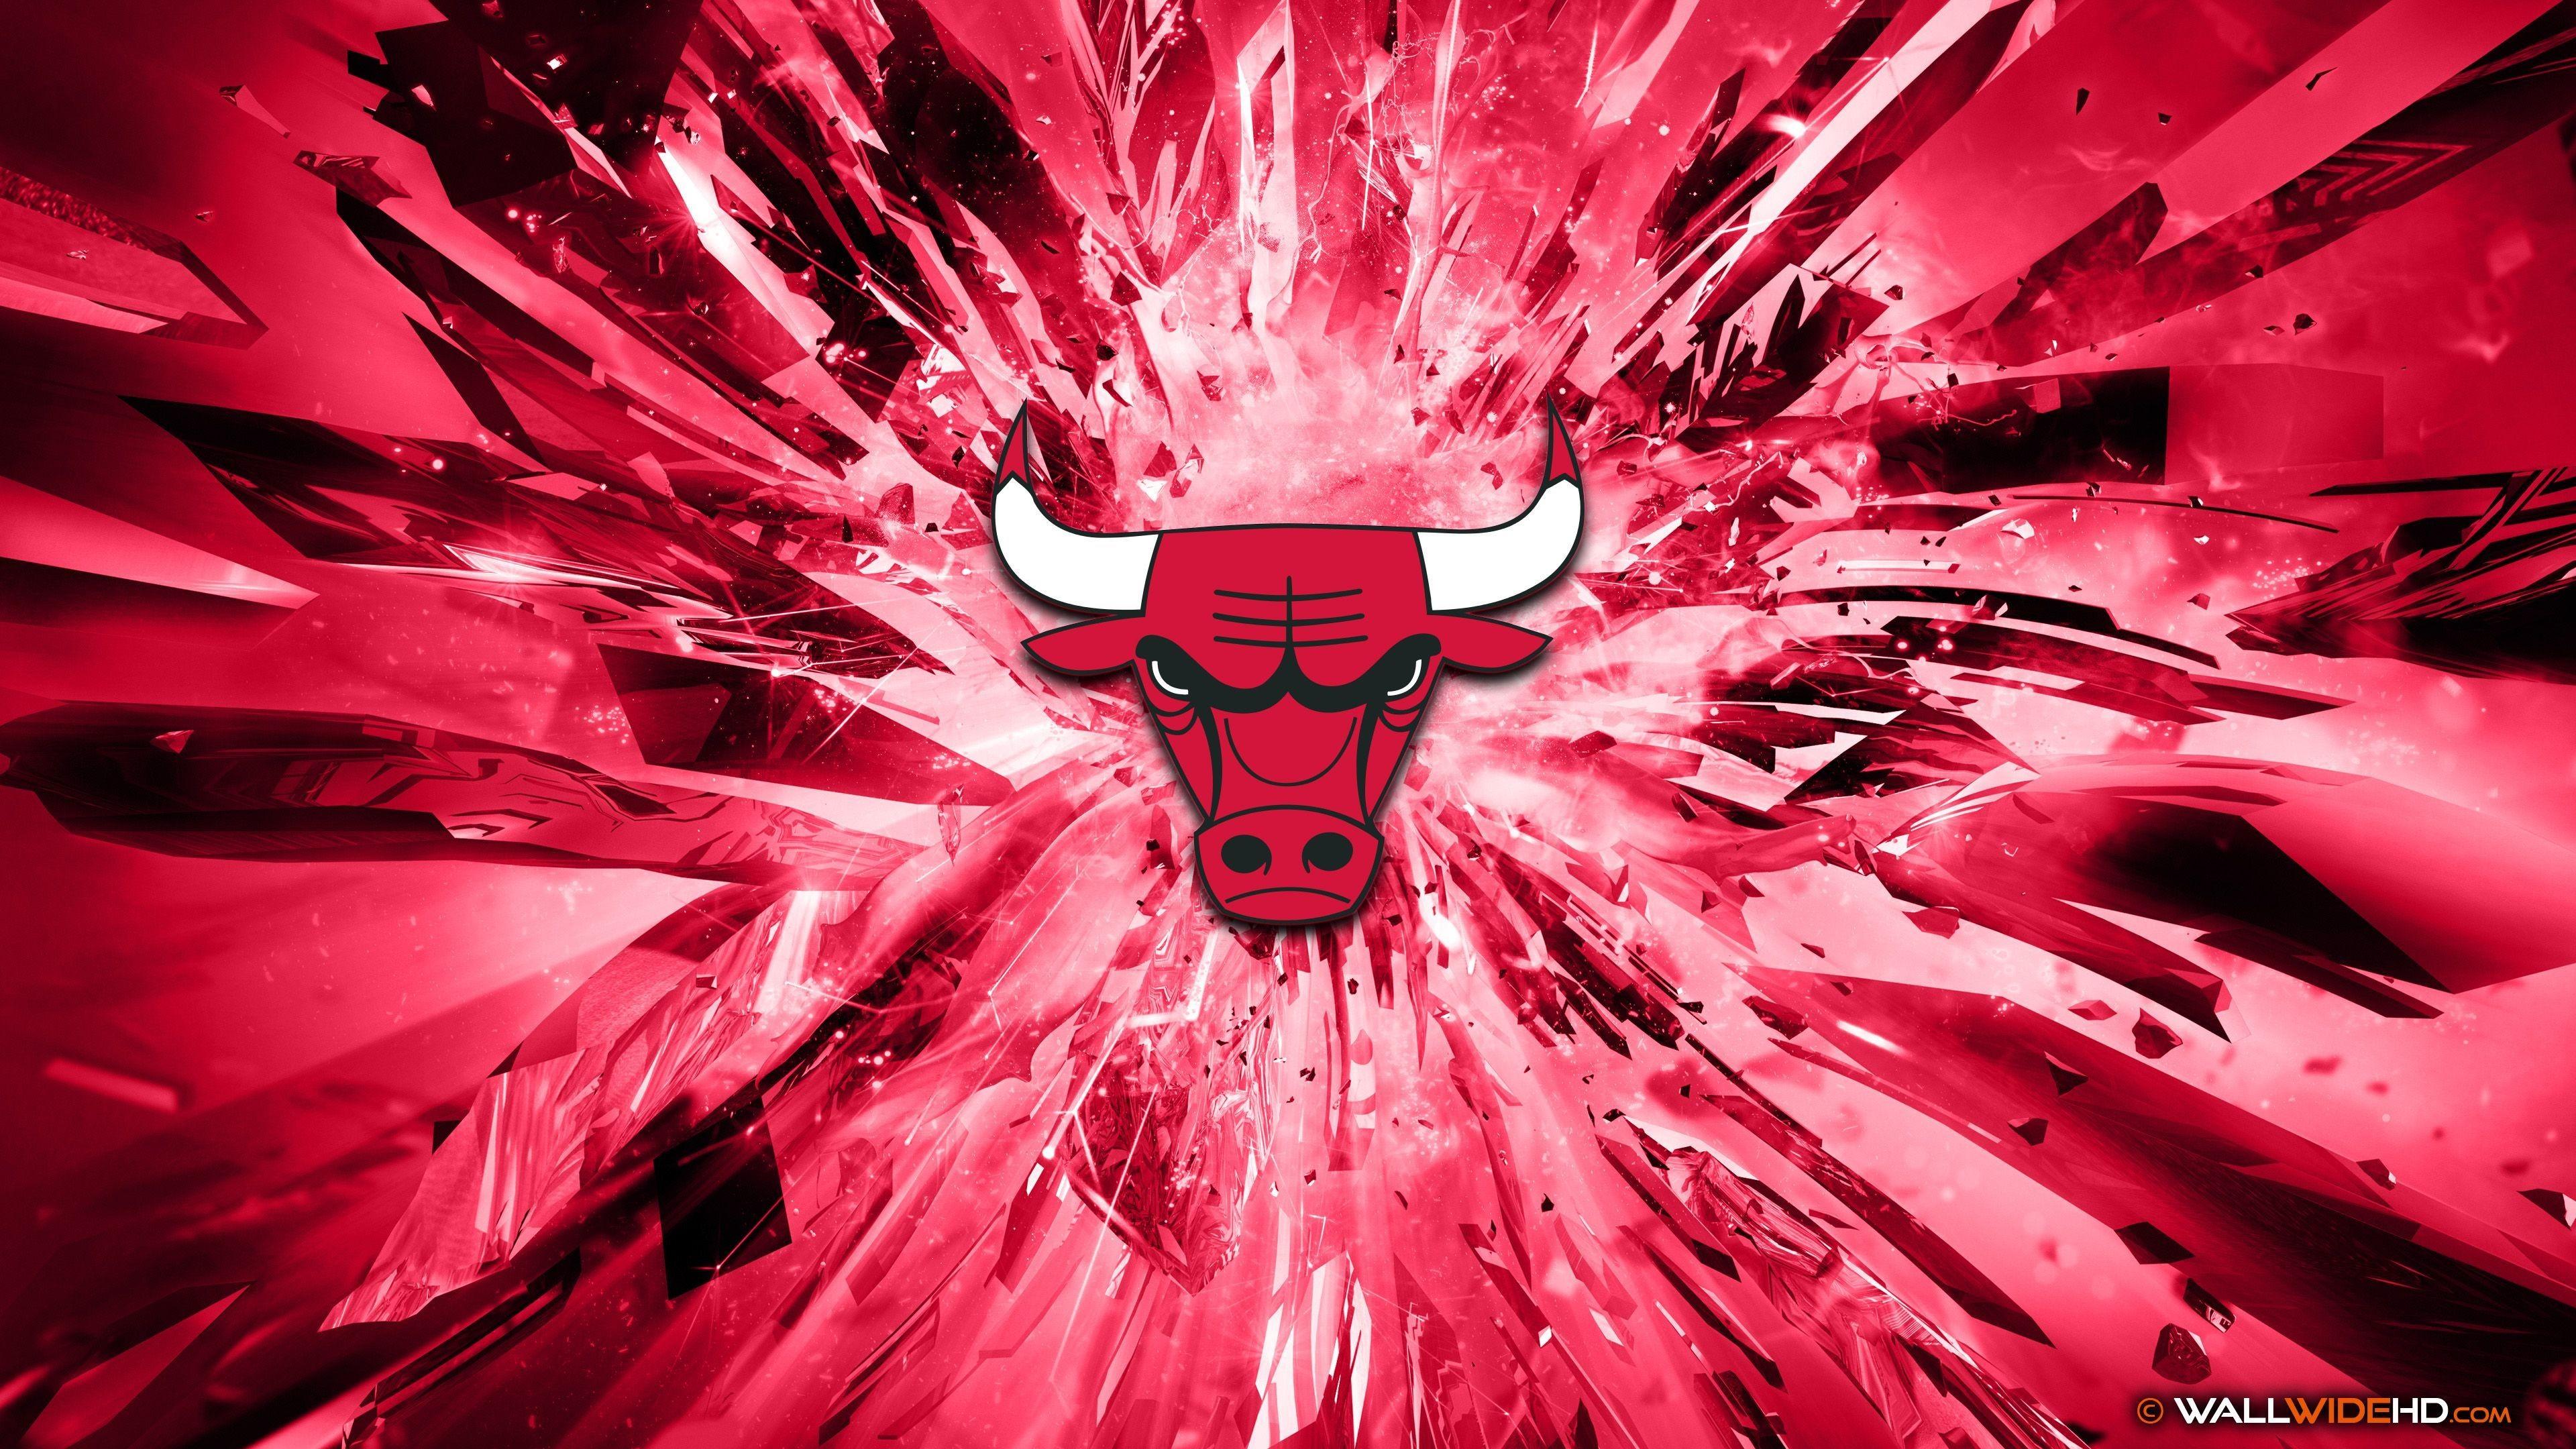 Chicago Bulls first five of the best Wallpaper by GrafikaTR on